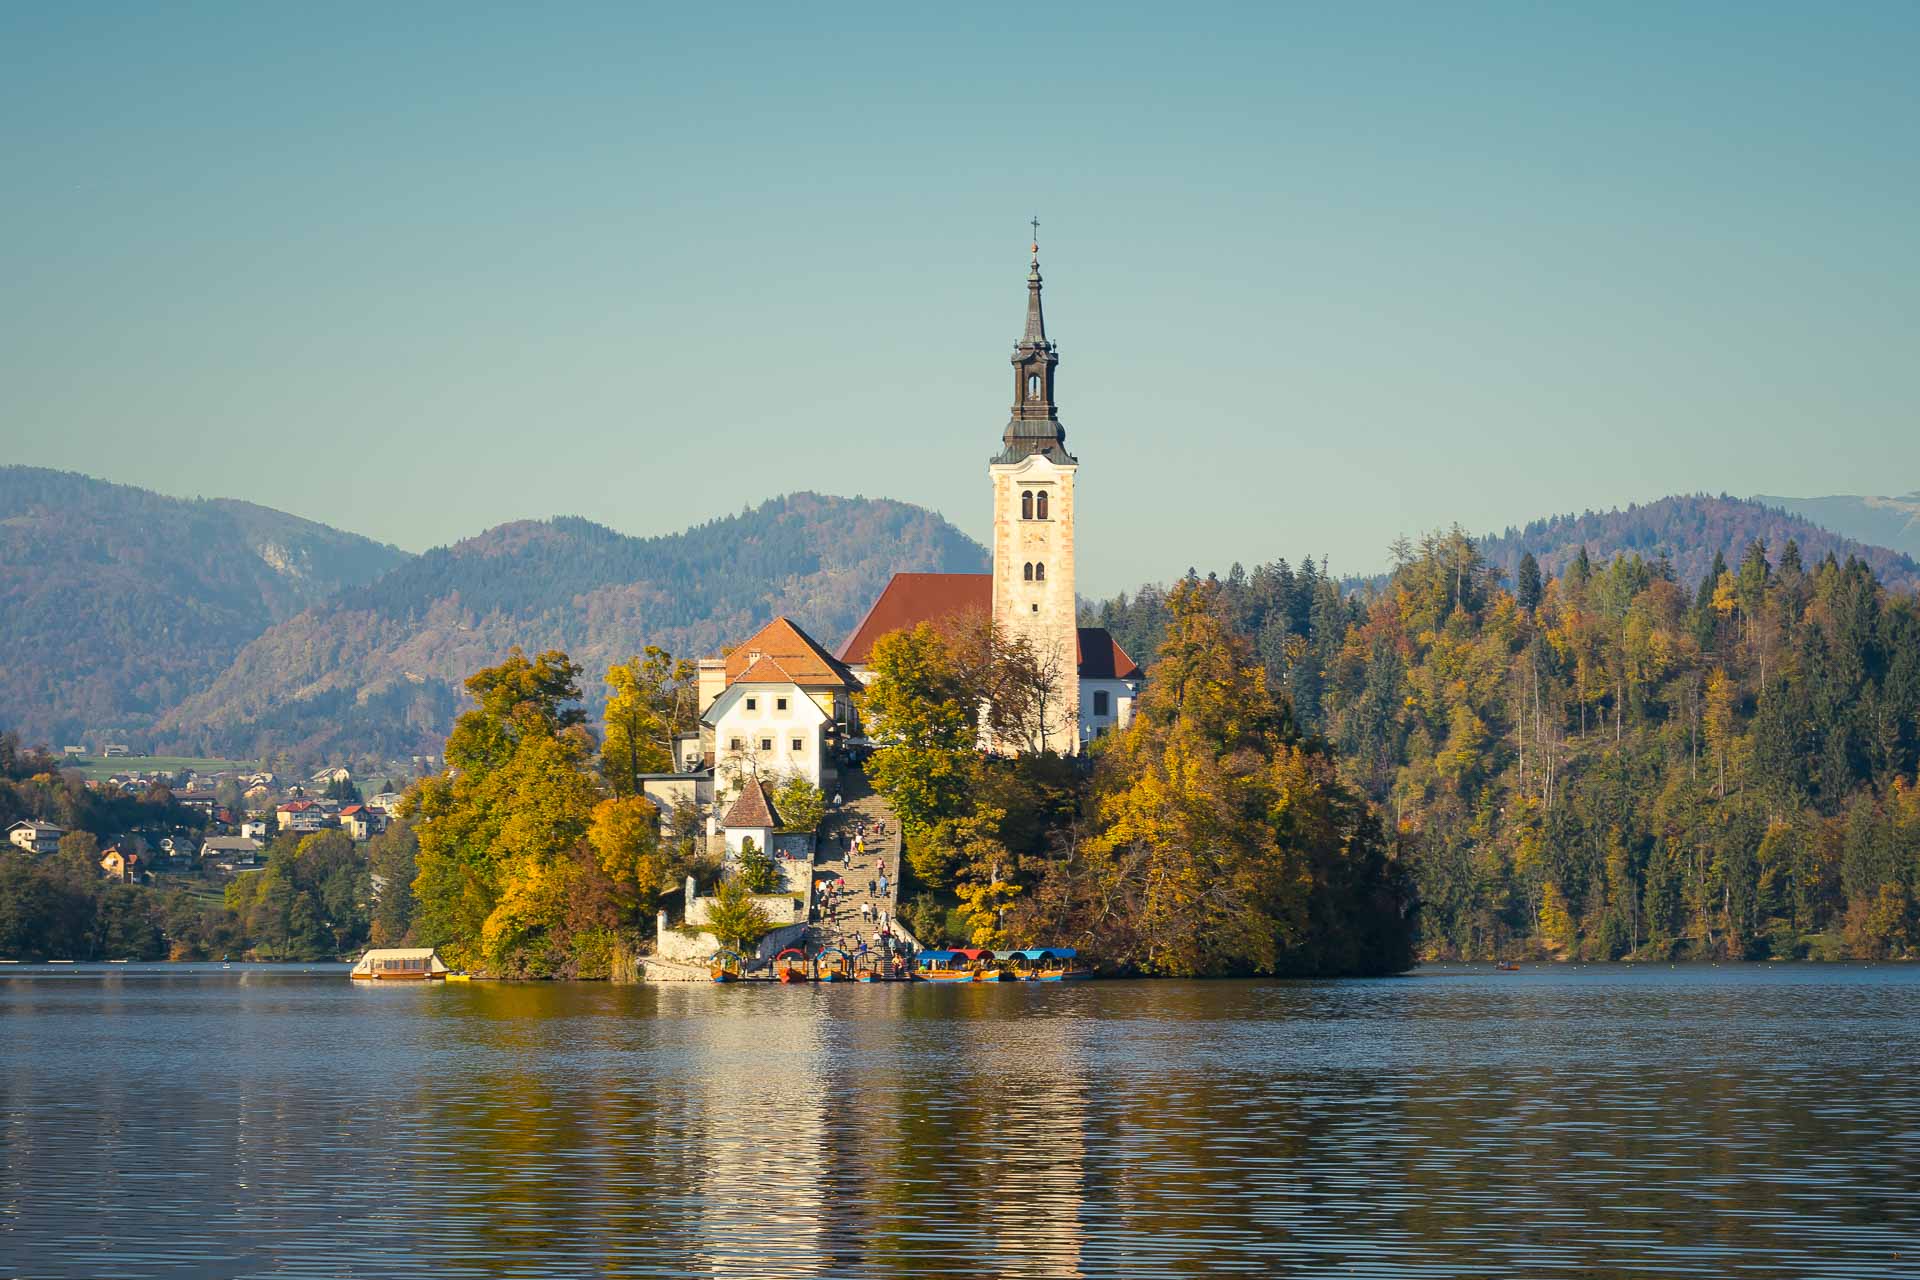 The island in Lake Bled